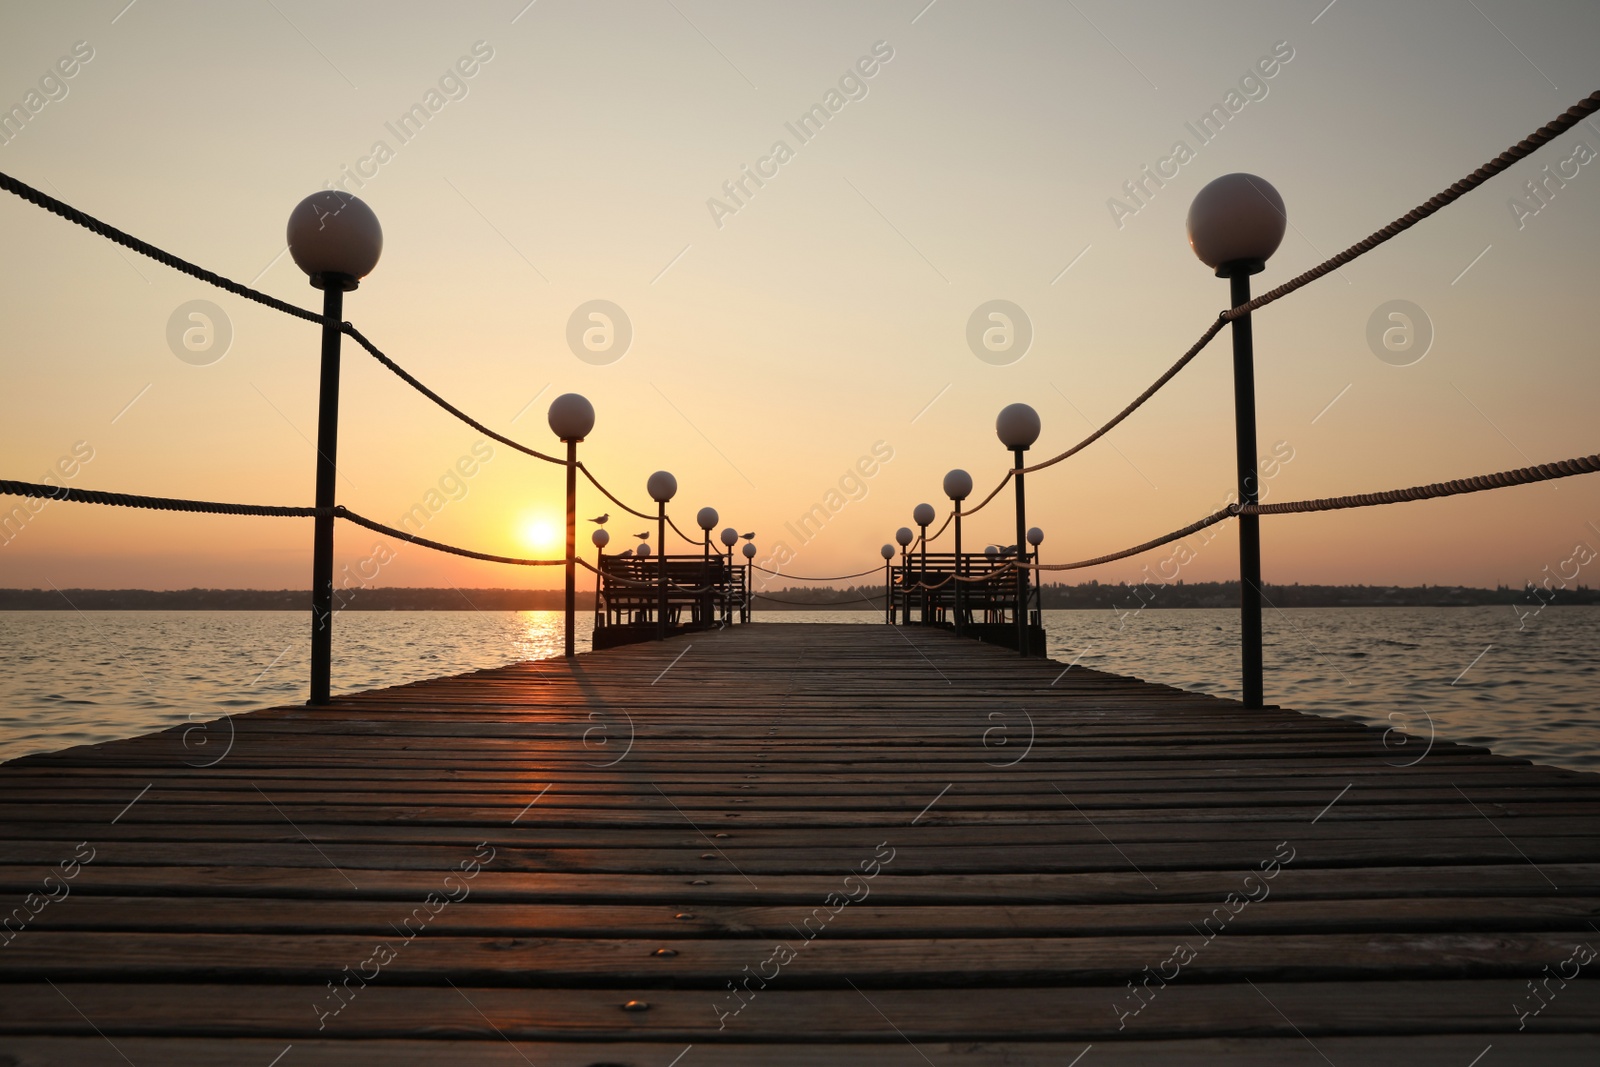 Photo of Picturesque view of empty wooden pier with lanterns at sunset